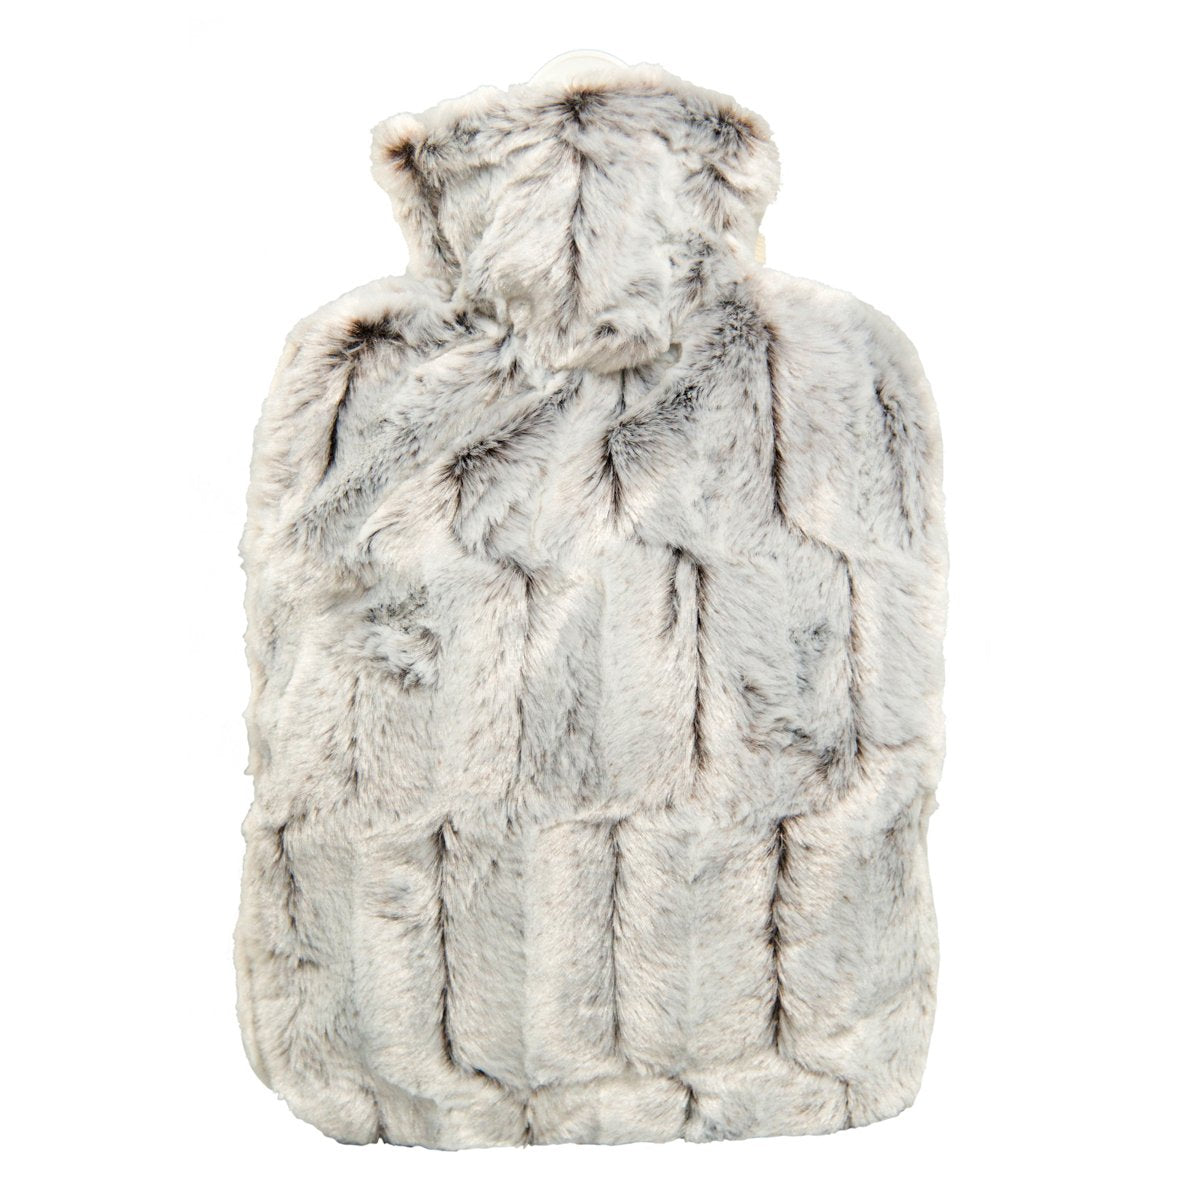 Hot Water Bottle Classic with Cover, Faux Fur - Brown-Silver